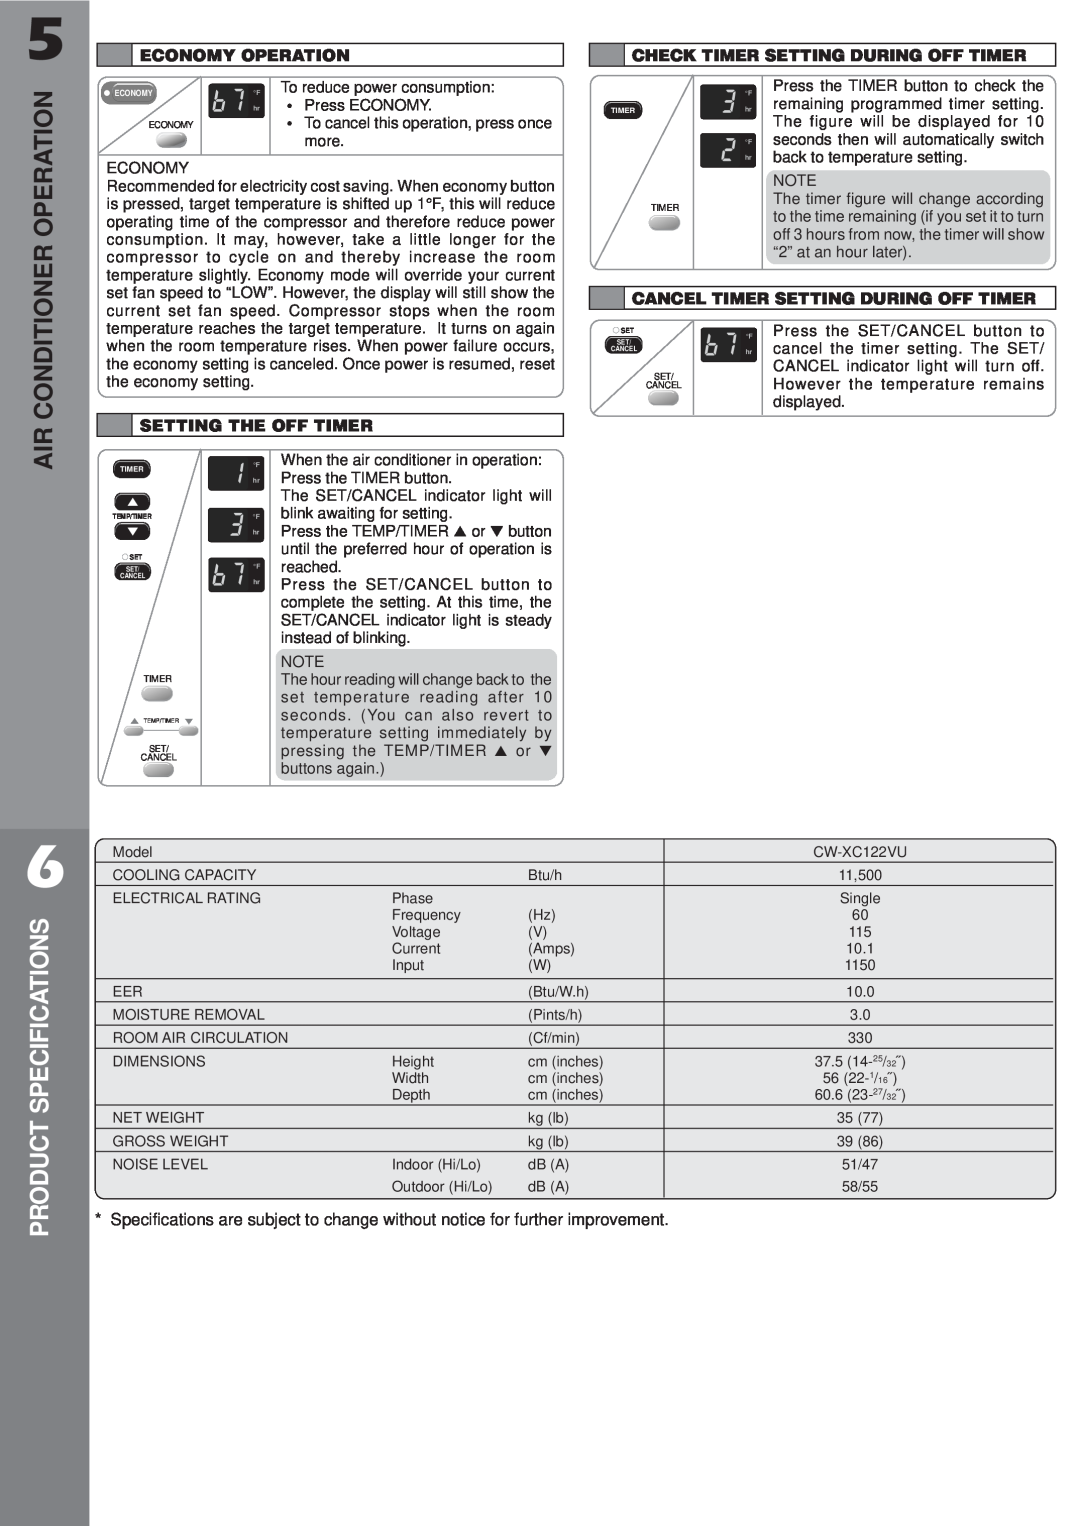 Panasonic CW-XC122VU manual Operation, Product Specifications, Conditioner 